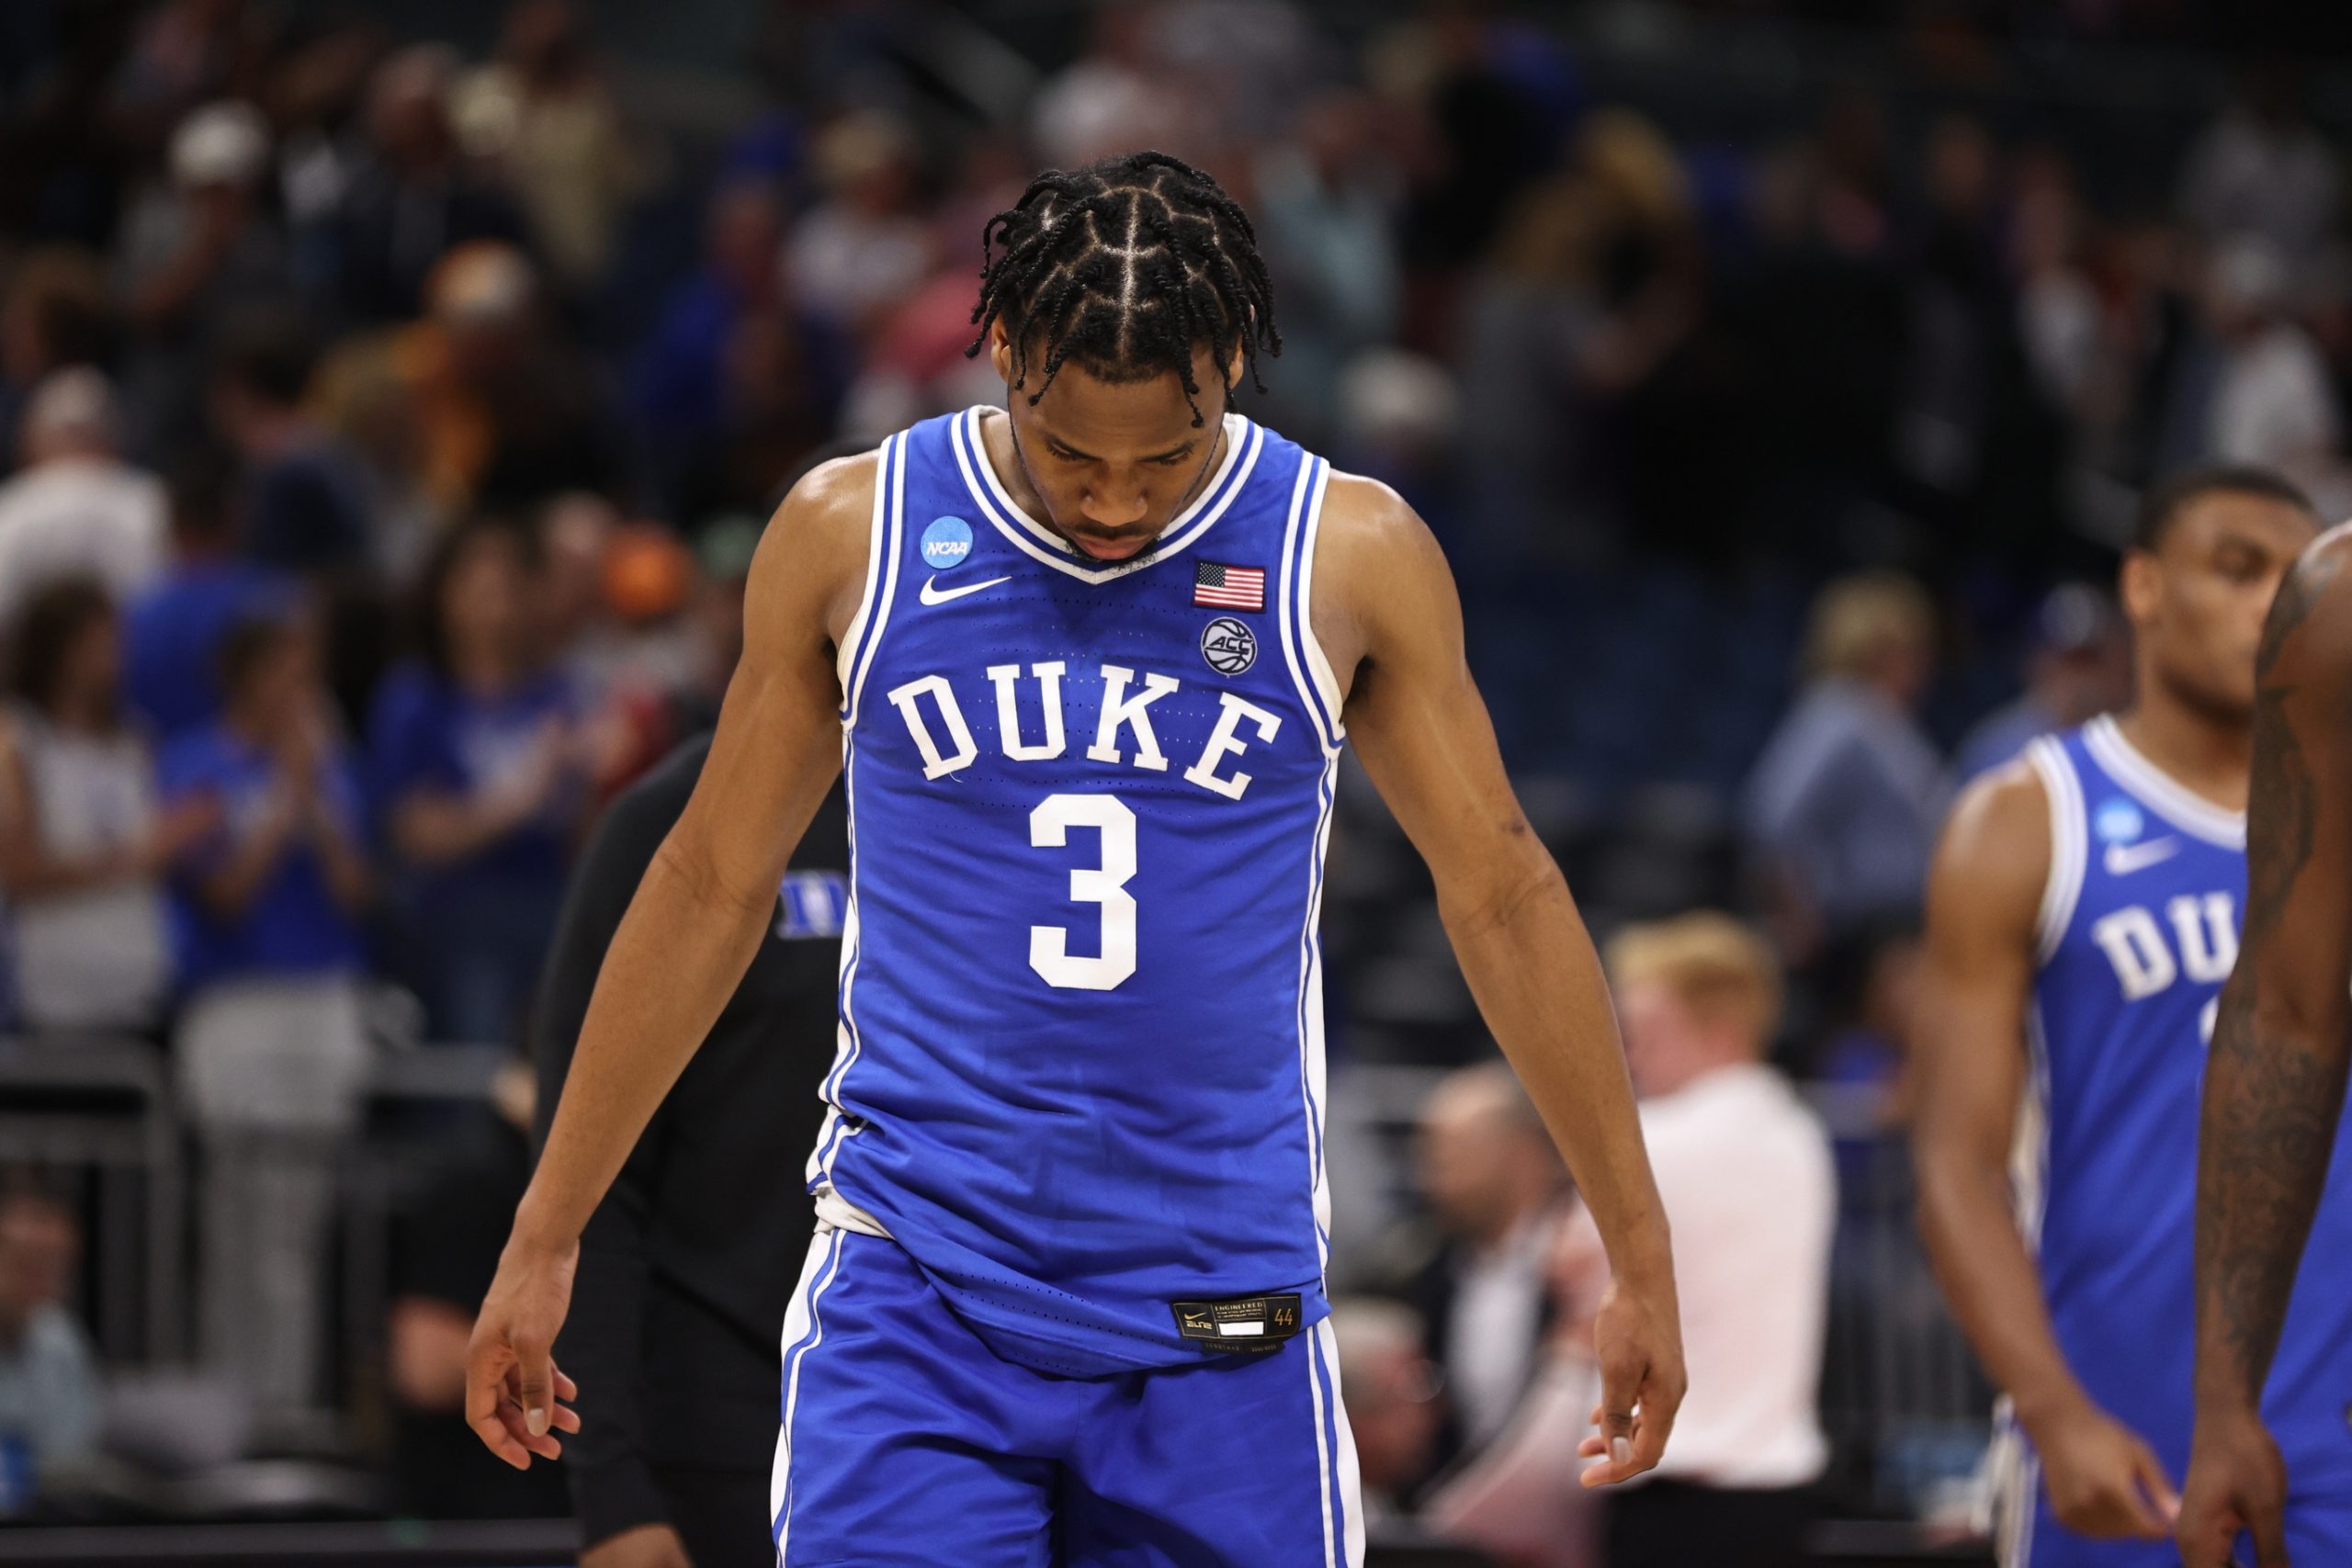 Jeremy Roach will determine what the 2023 Duke roster looks like